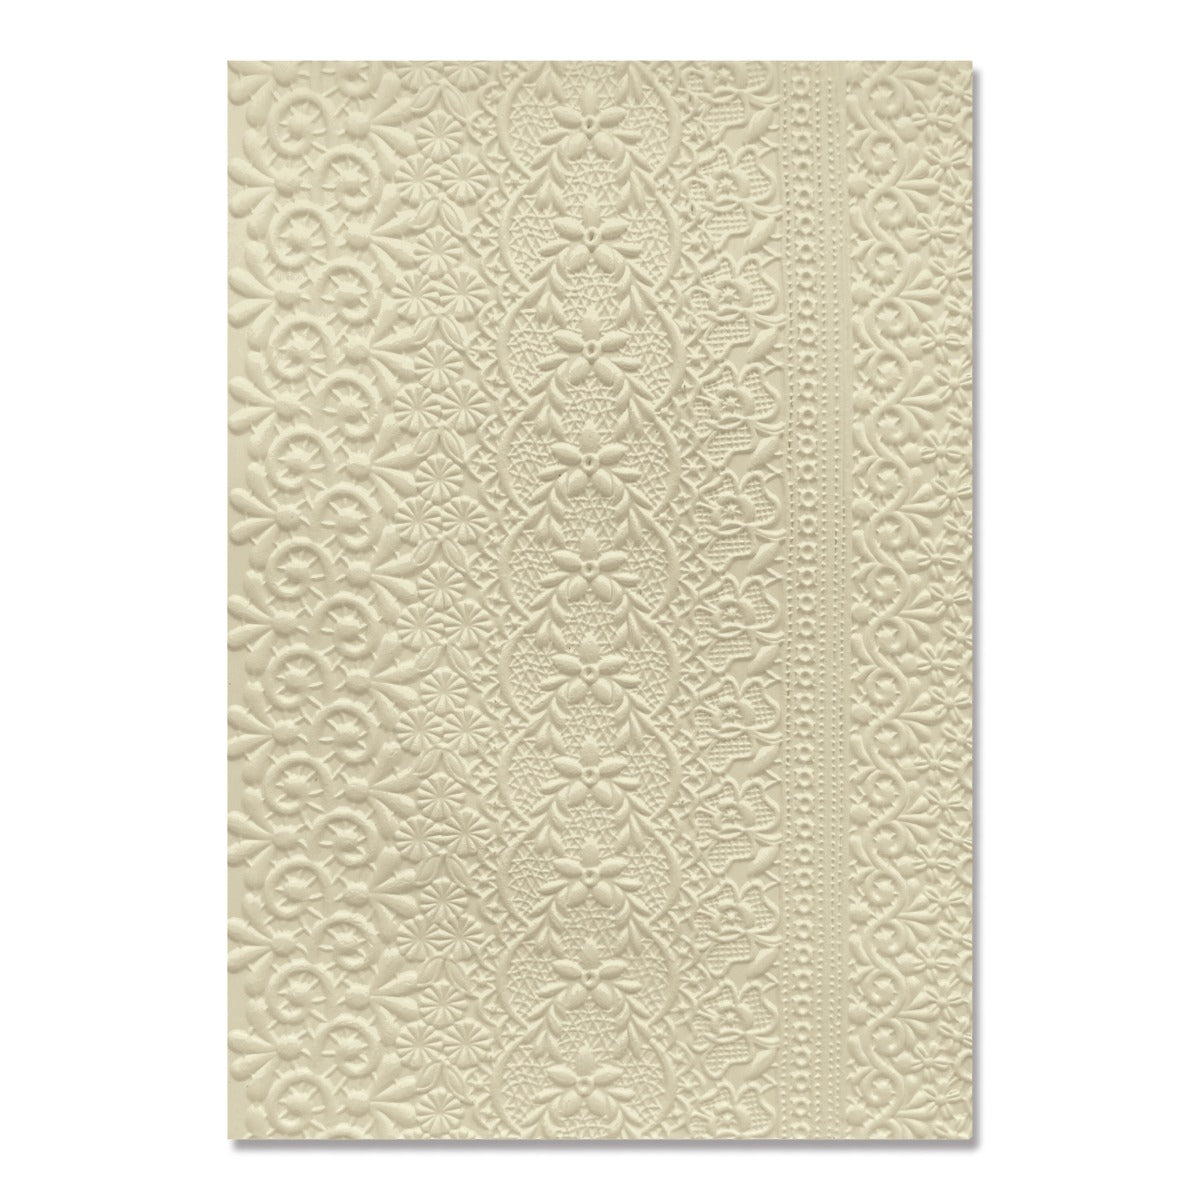 sizzix-3-d-textured-impressions-a5-embossing-folder-lace-by-eileen-hull